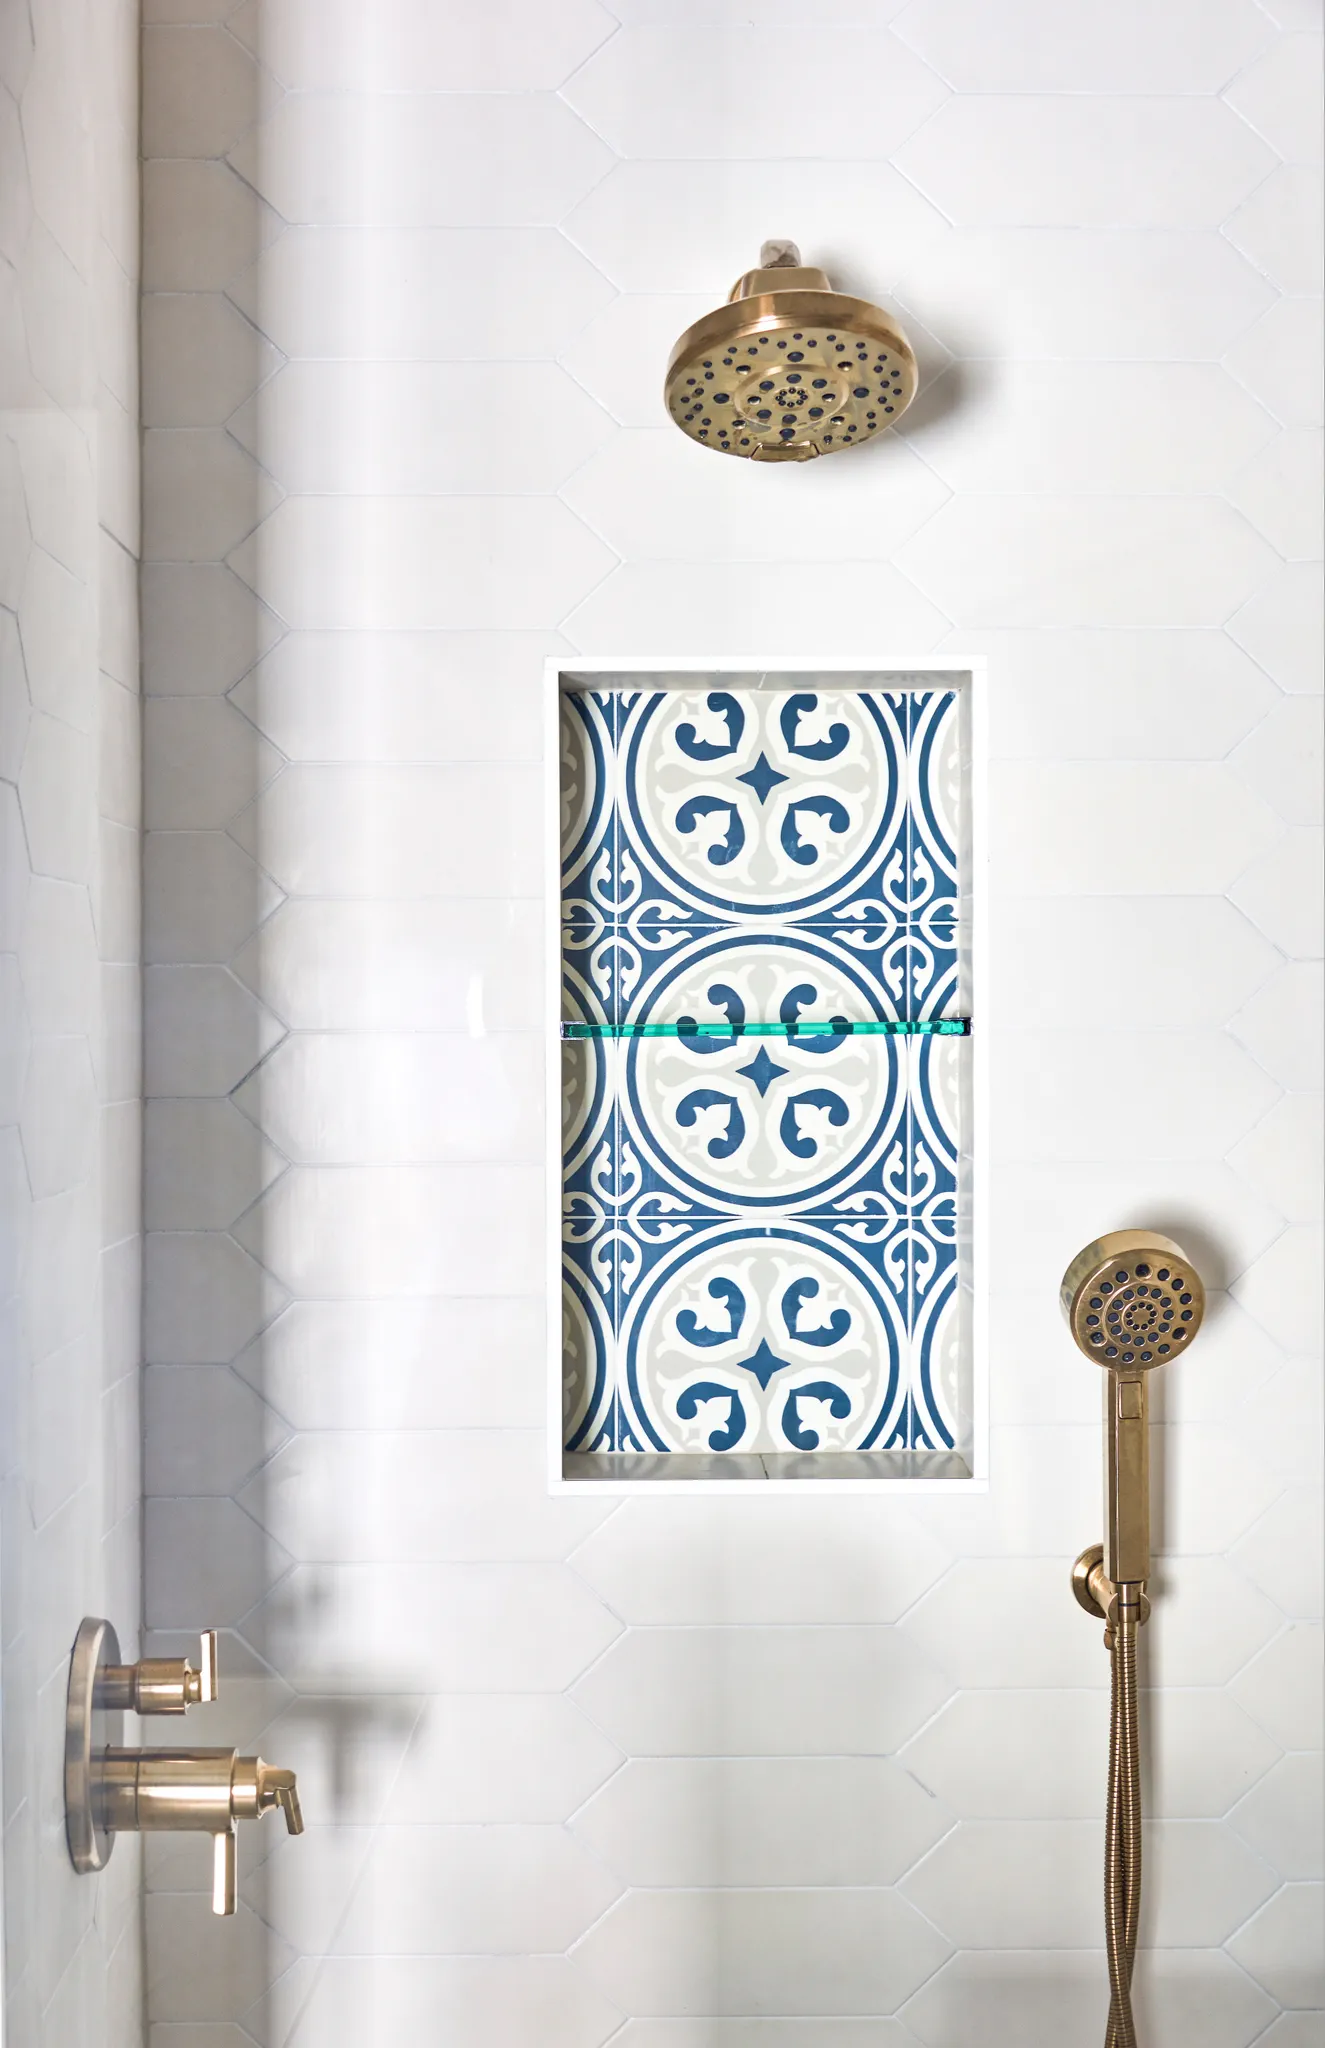 Shower tile and niche